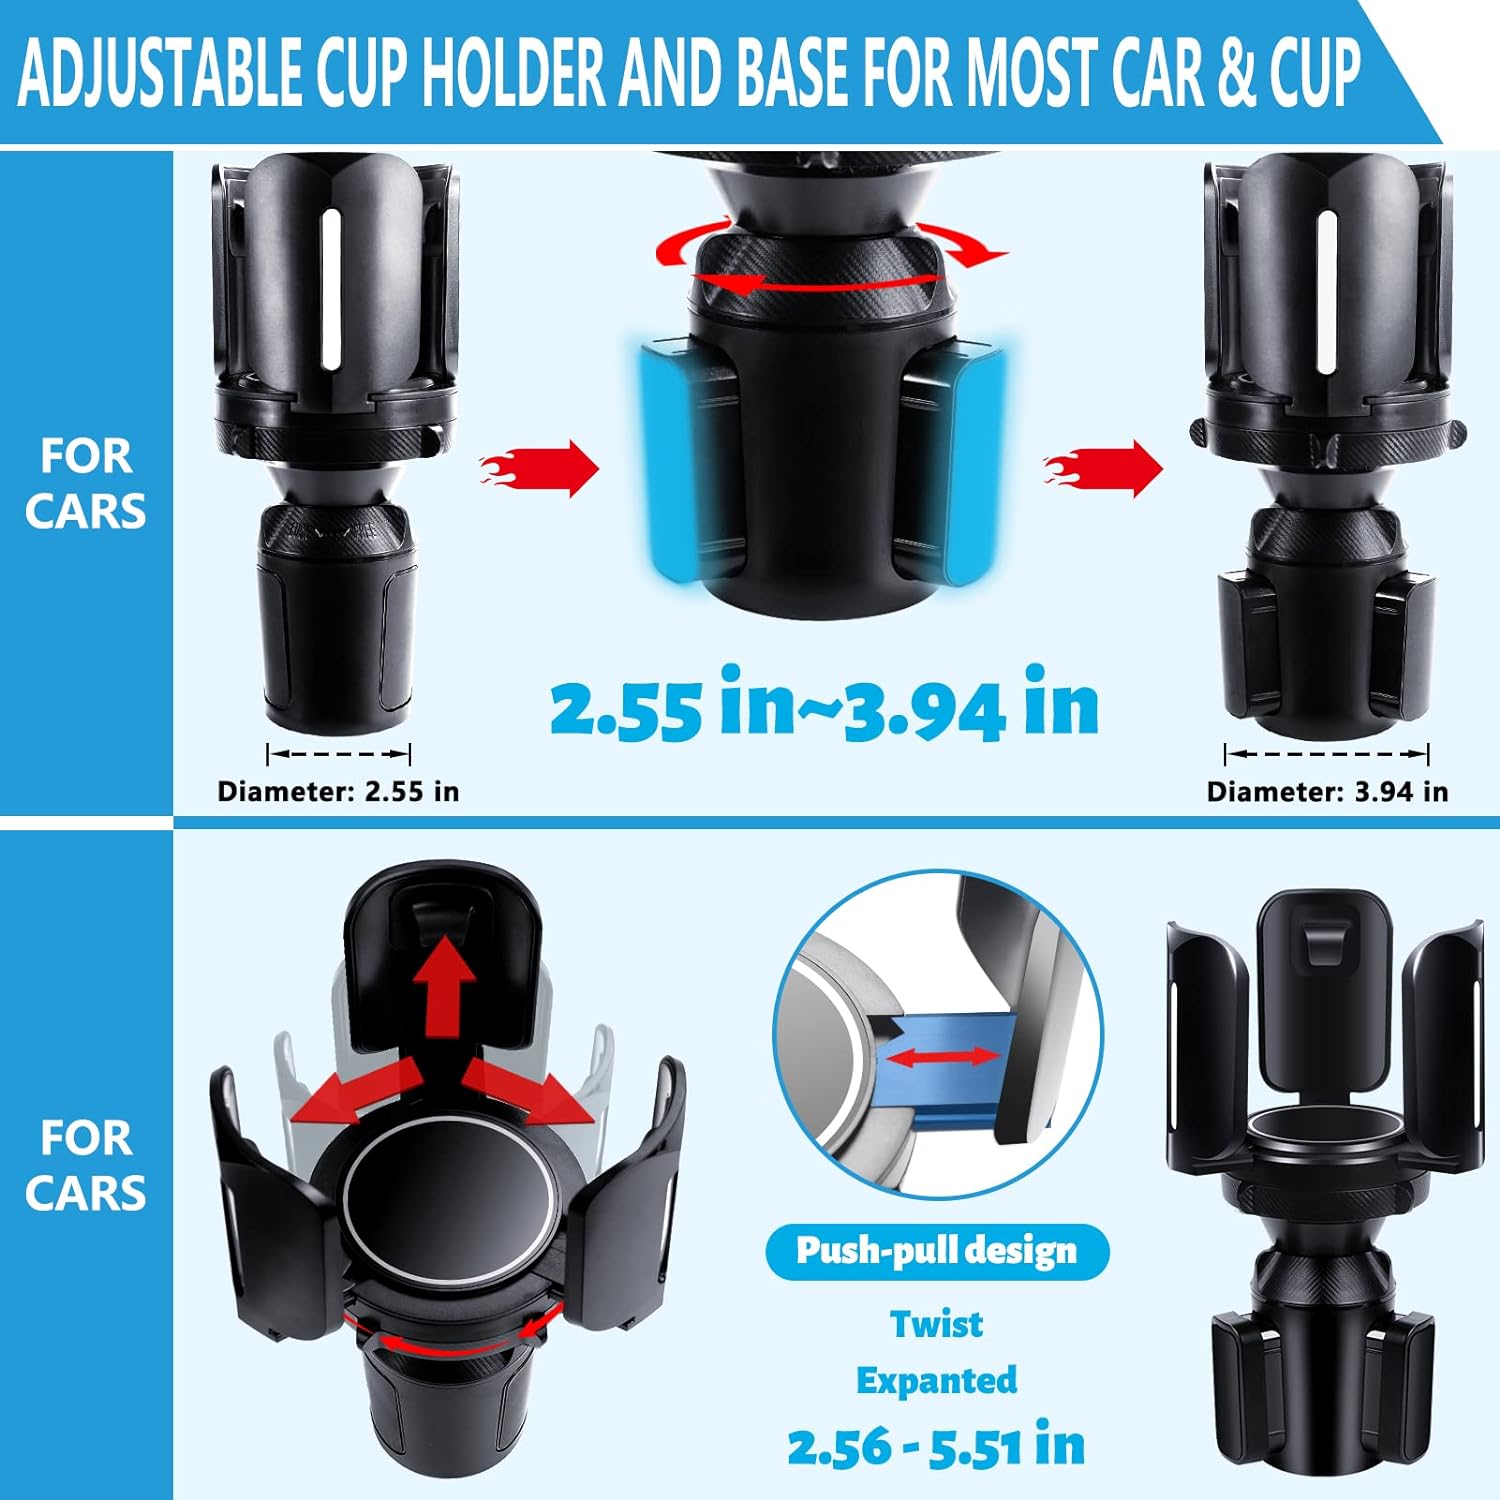 Cup Holder Expander for Car with Adjustable Holder & Base, Matching with Yeti 14/24/36/46oz Ramblers, Hydro Flask, Nalgene, Hold 2.5"-5.1" Large Bottles Mugs Food Drink, Universal Fit Car Cup Holder